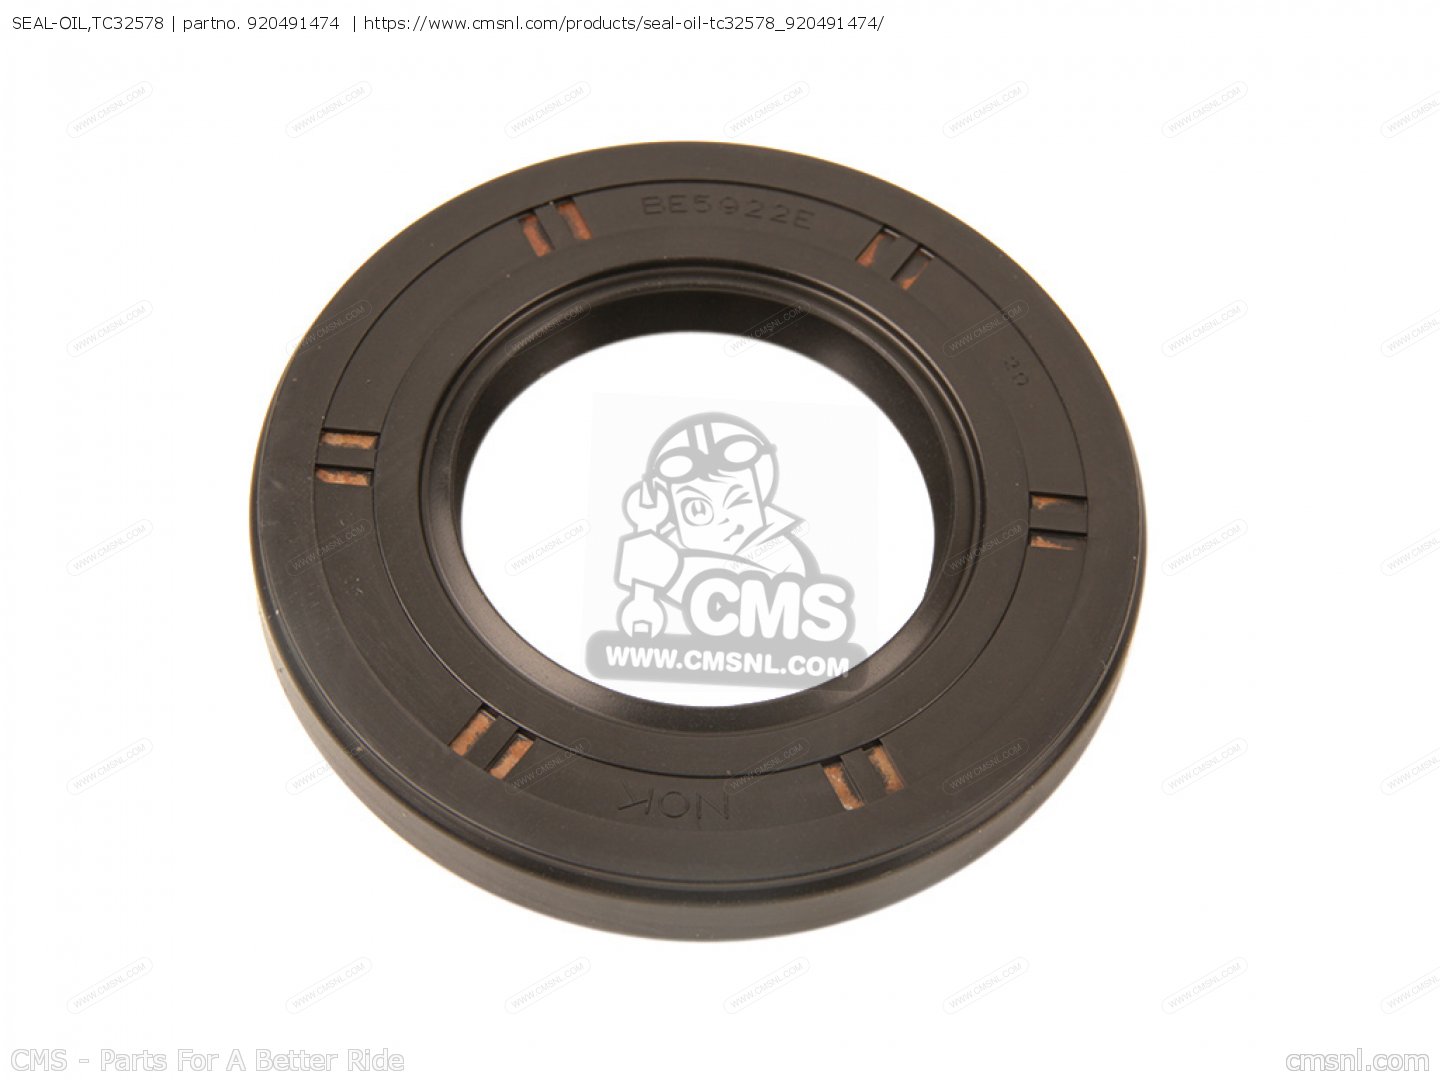 SEAL-OIL,TC32578 for ZX1000MEF NINJA1000 2014 USA / ABS - order at 